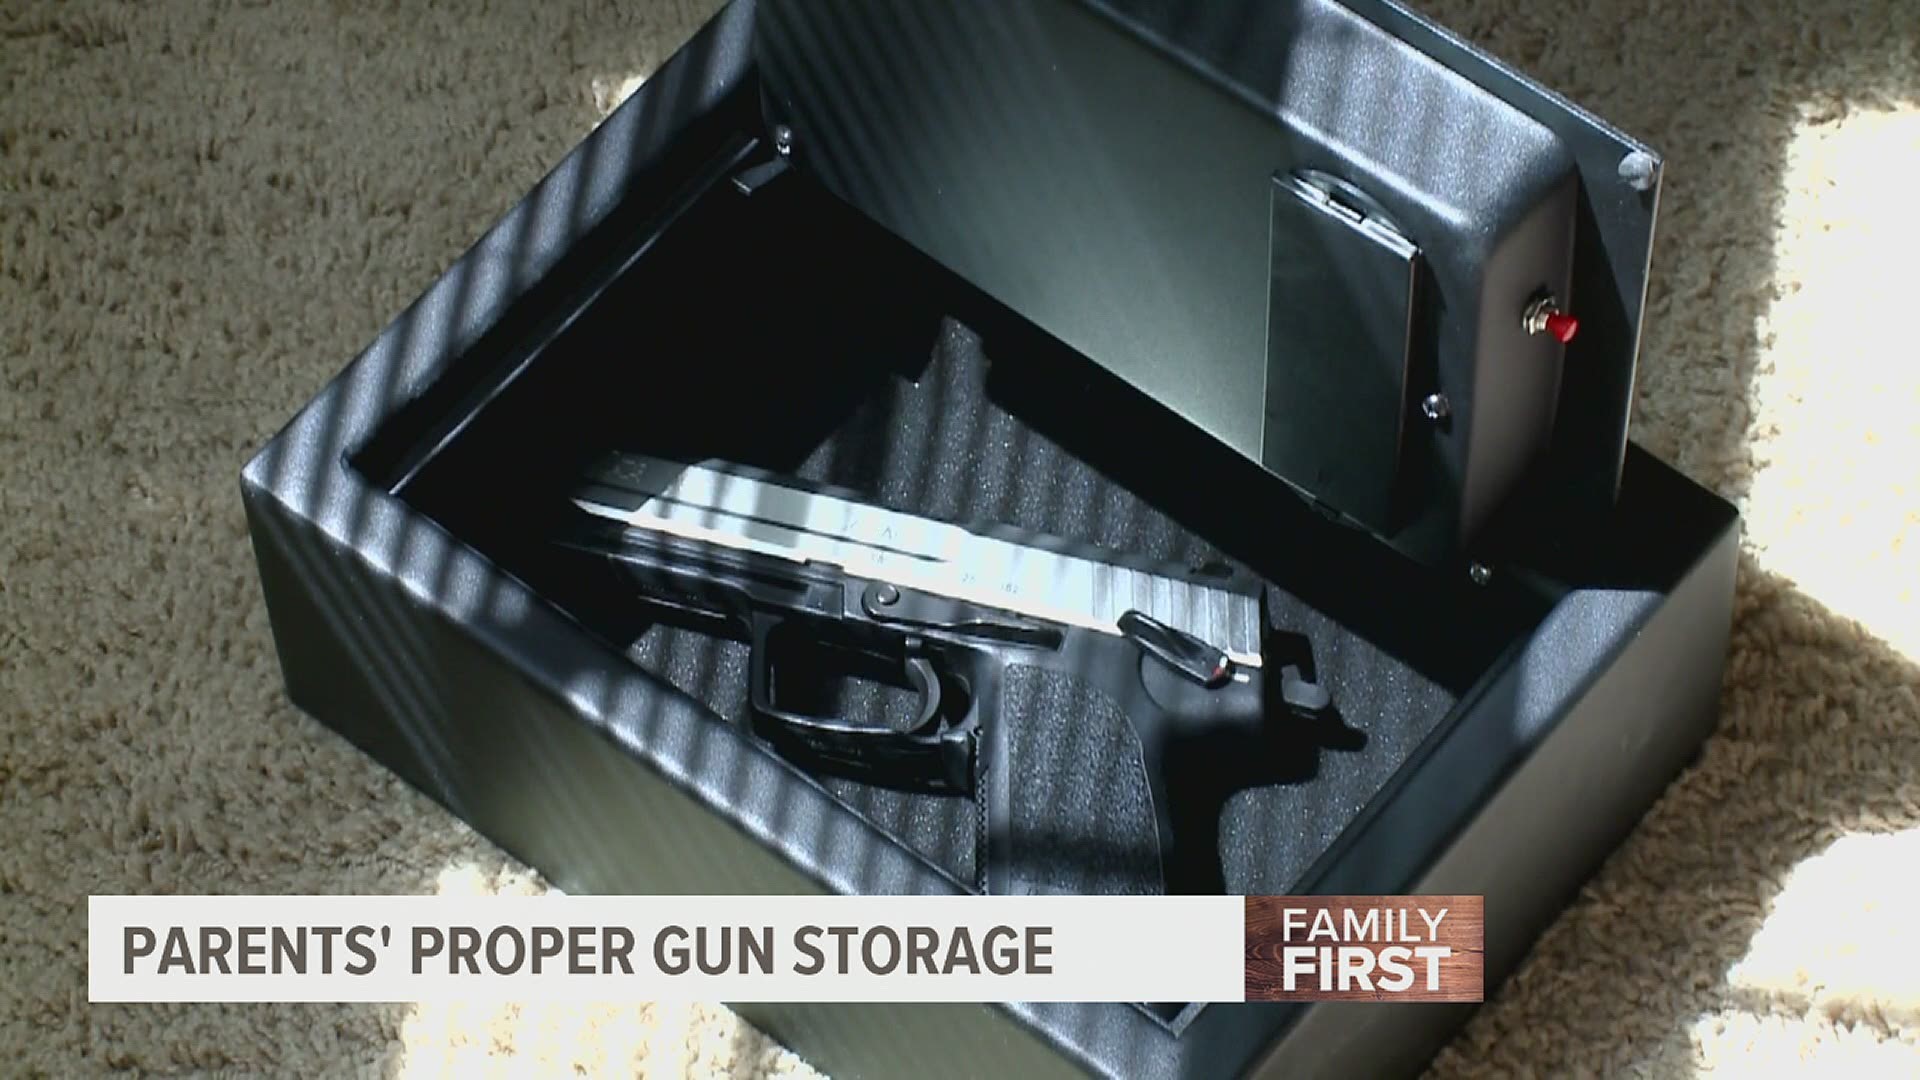 After a 10-year-old in Dauphin County accidentally shot and killed his brother, police are reminding parents of the safest ways to store guns in homes.